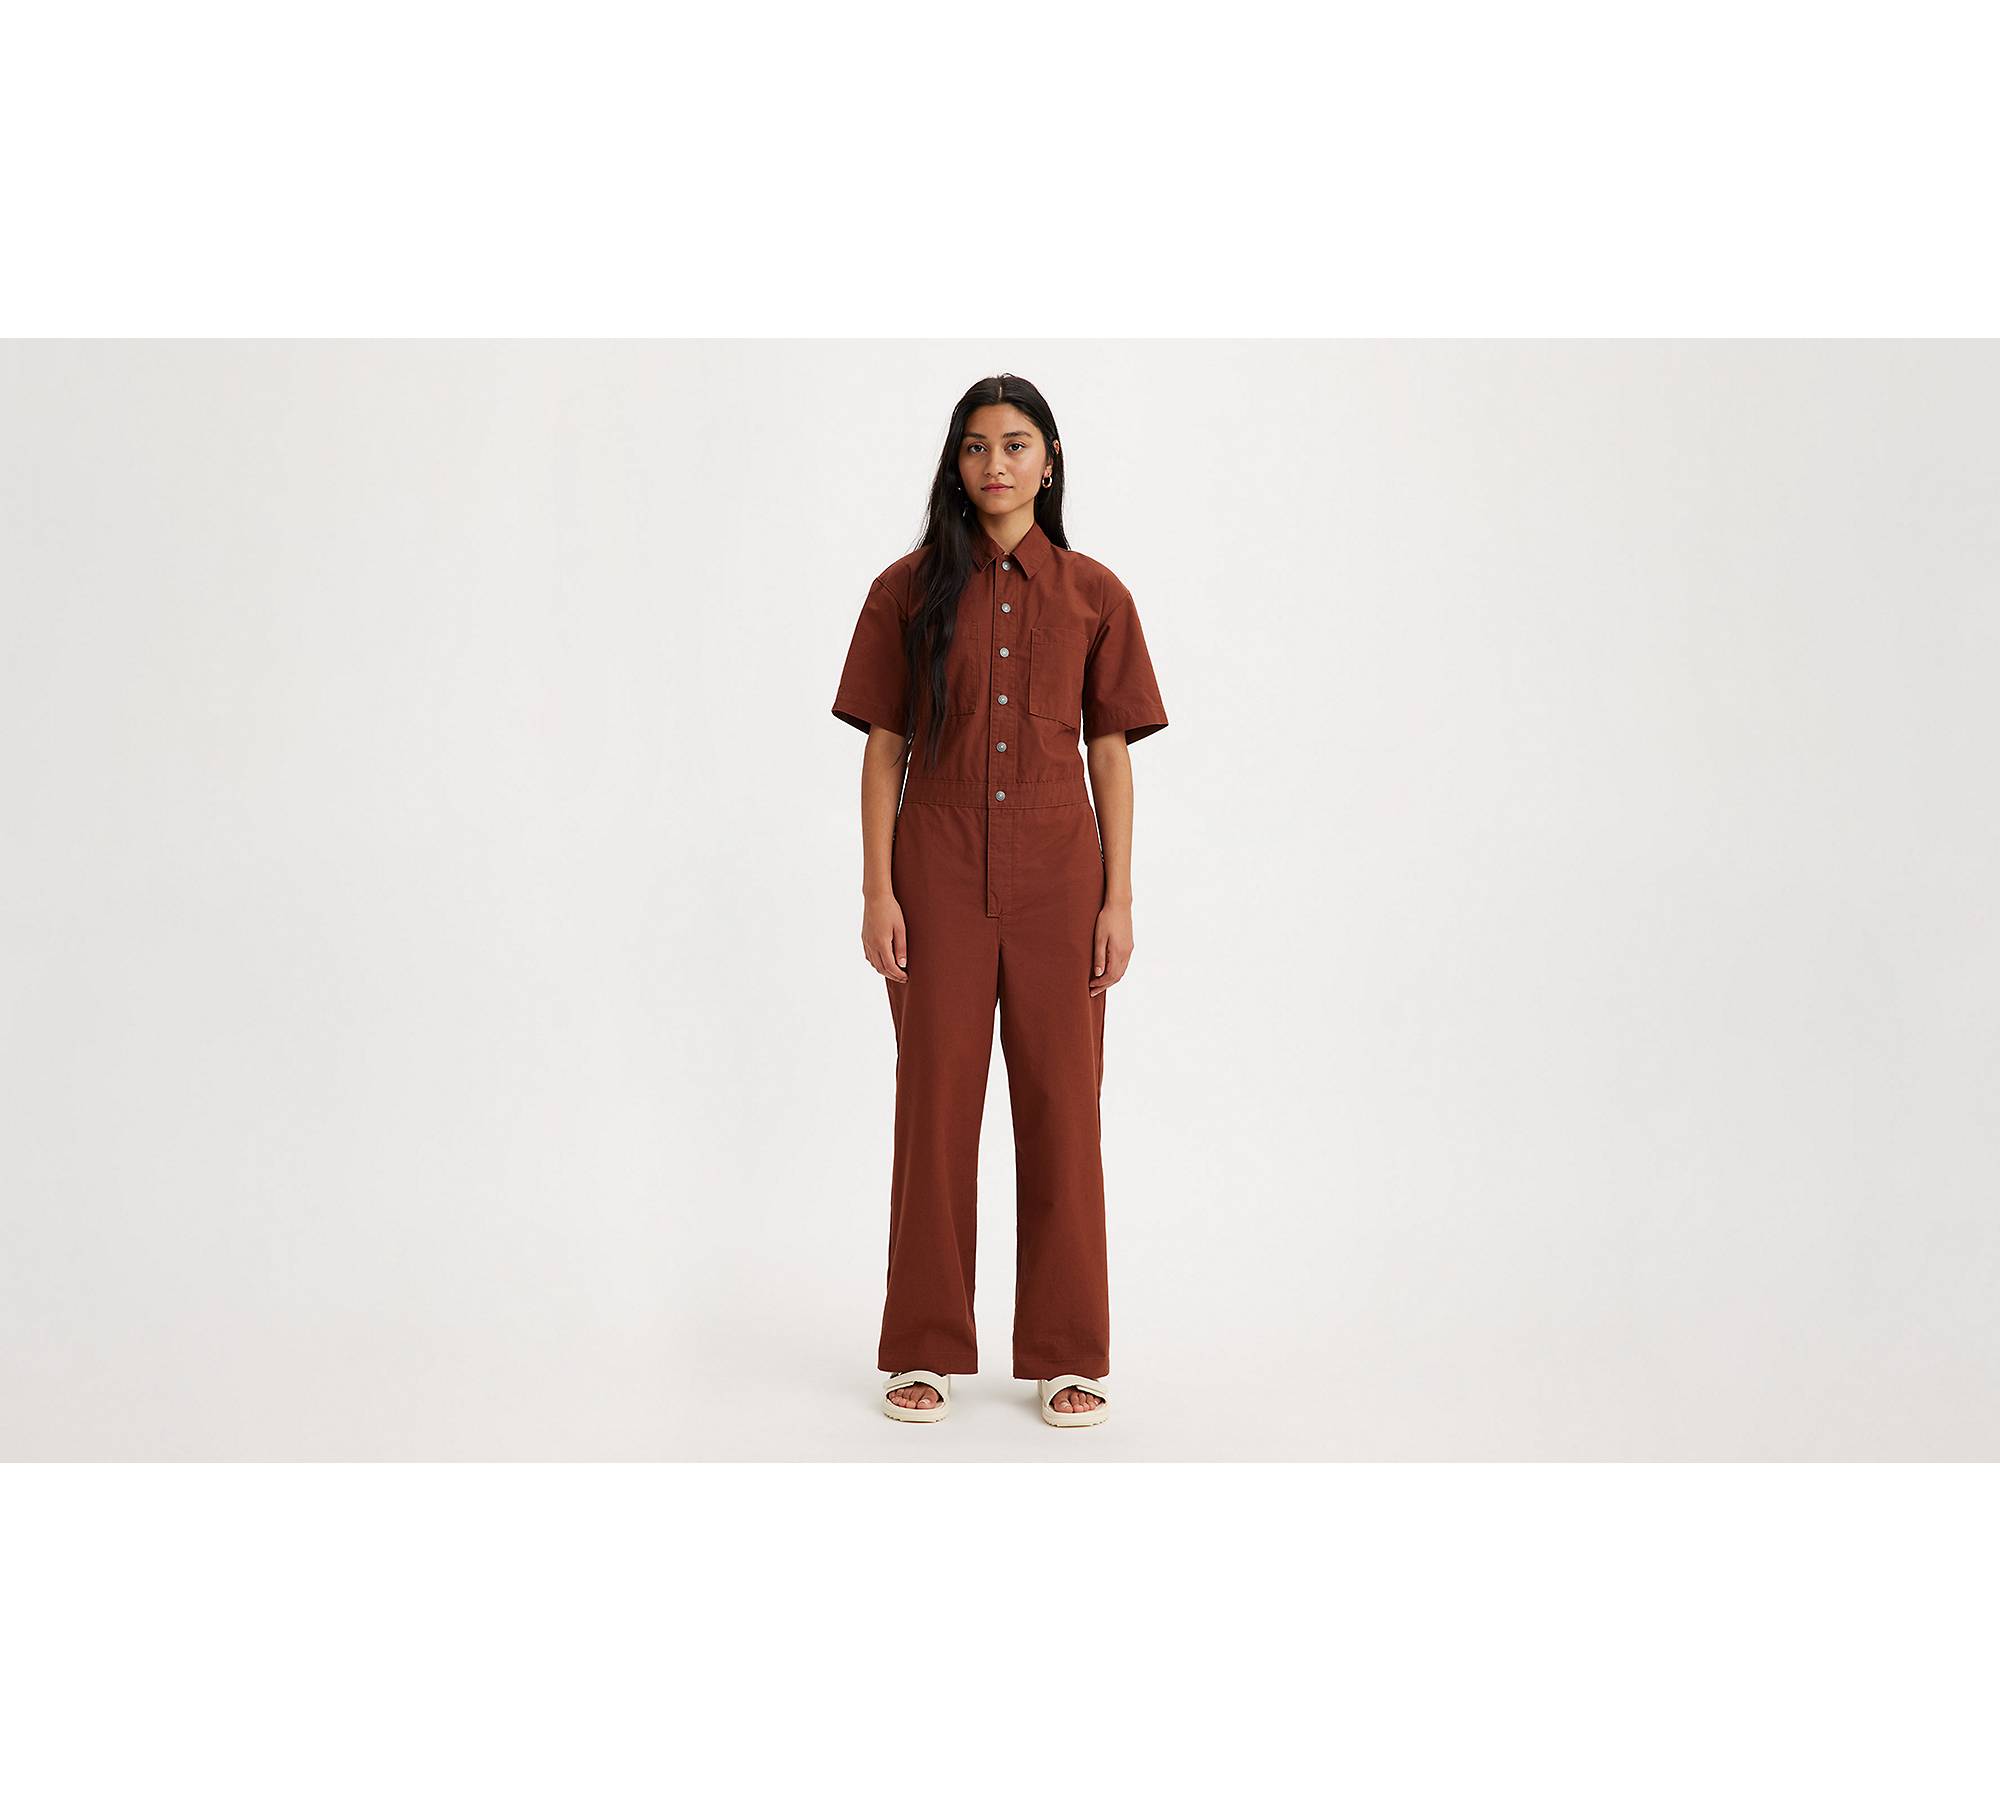 Short Sleeve Utility Style Jumpsuit - Pear and Simple